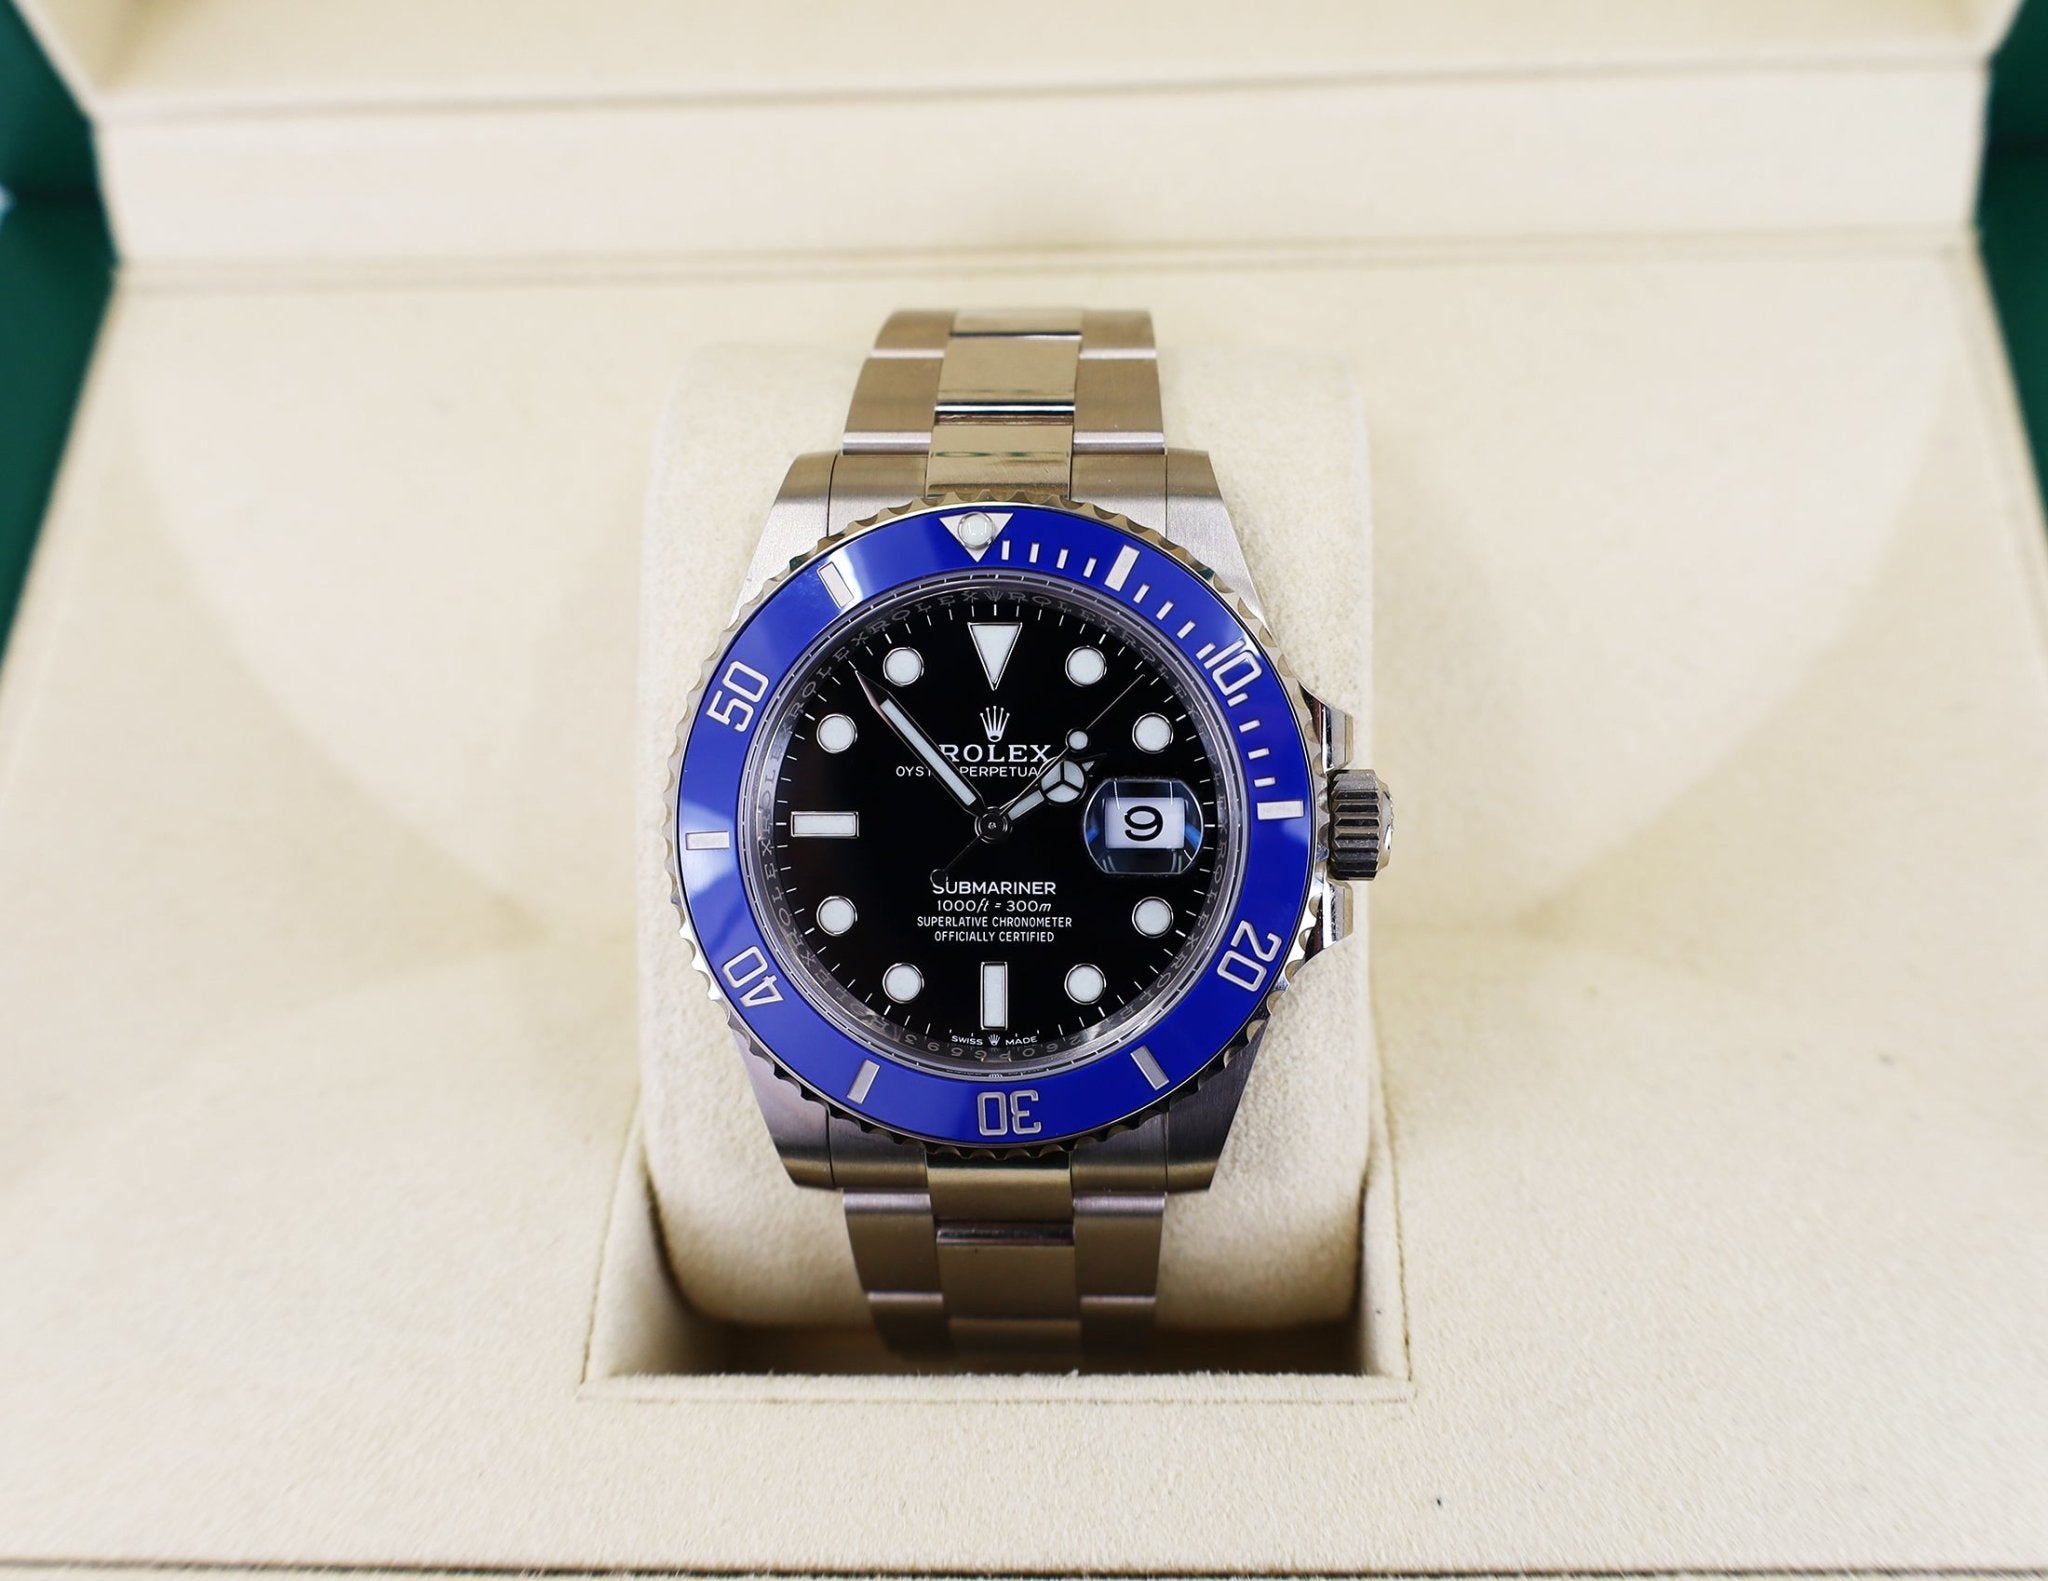 White Gold Submariner Date Watch - The Blueberry Blue Bezel - – Time NYC